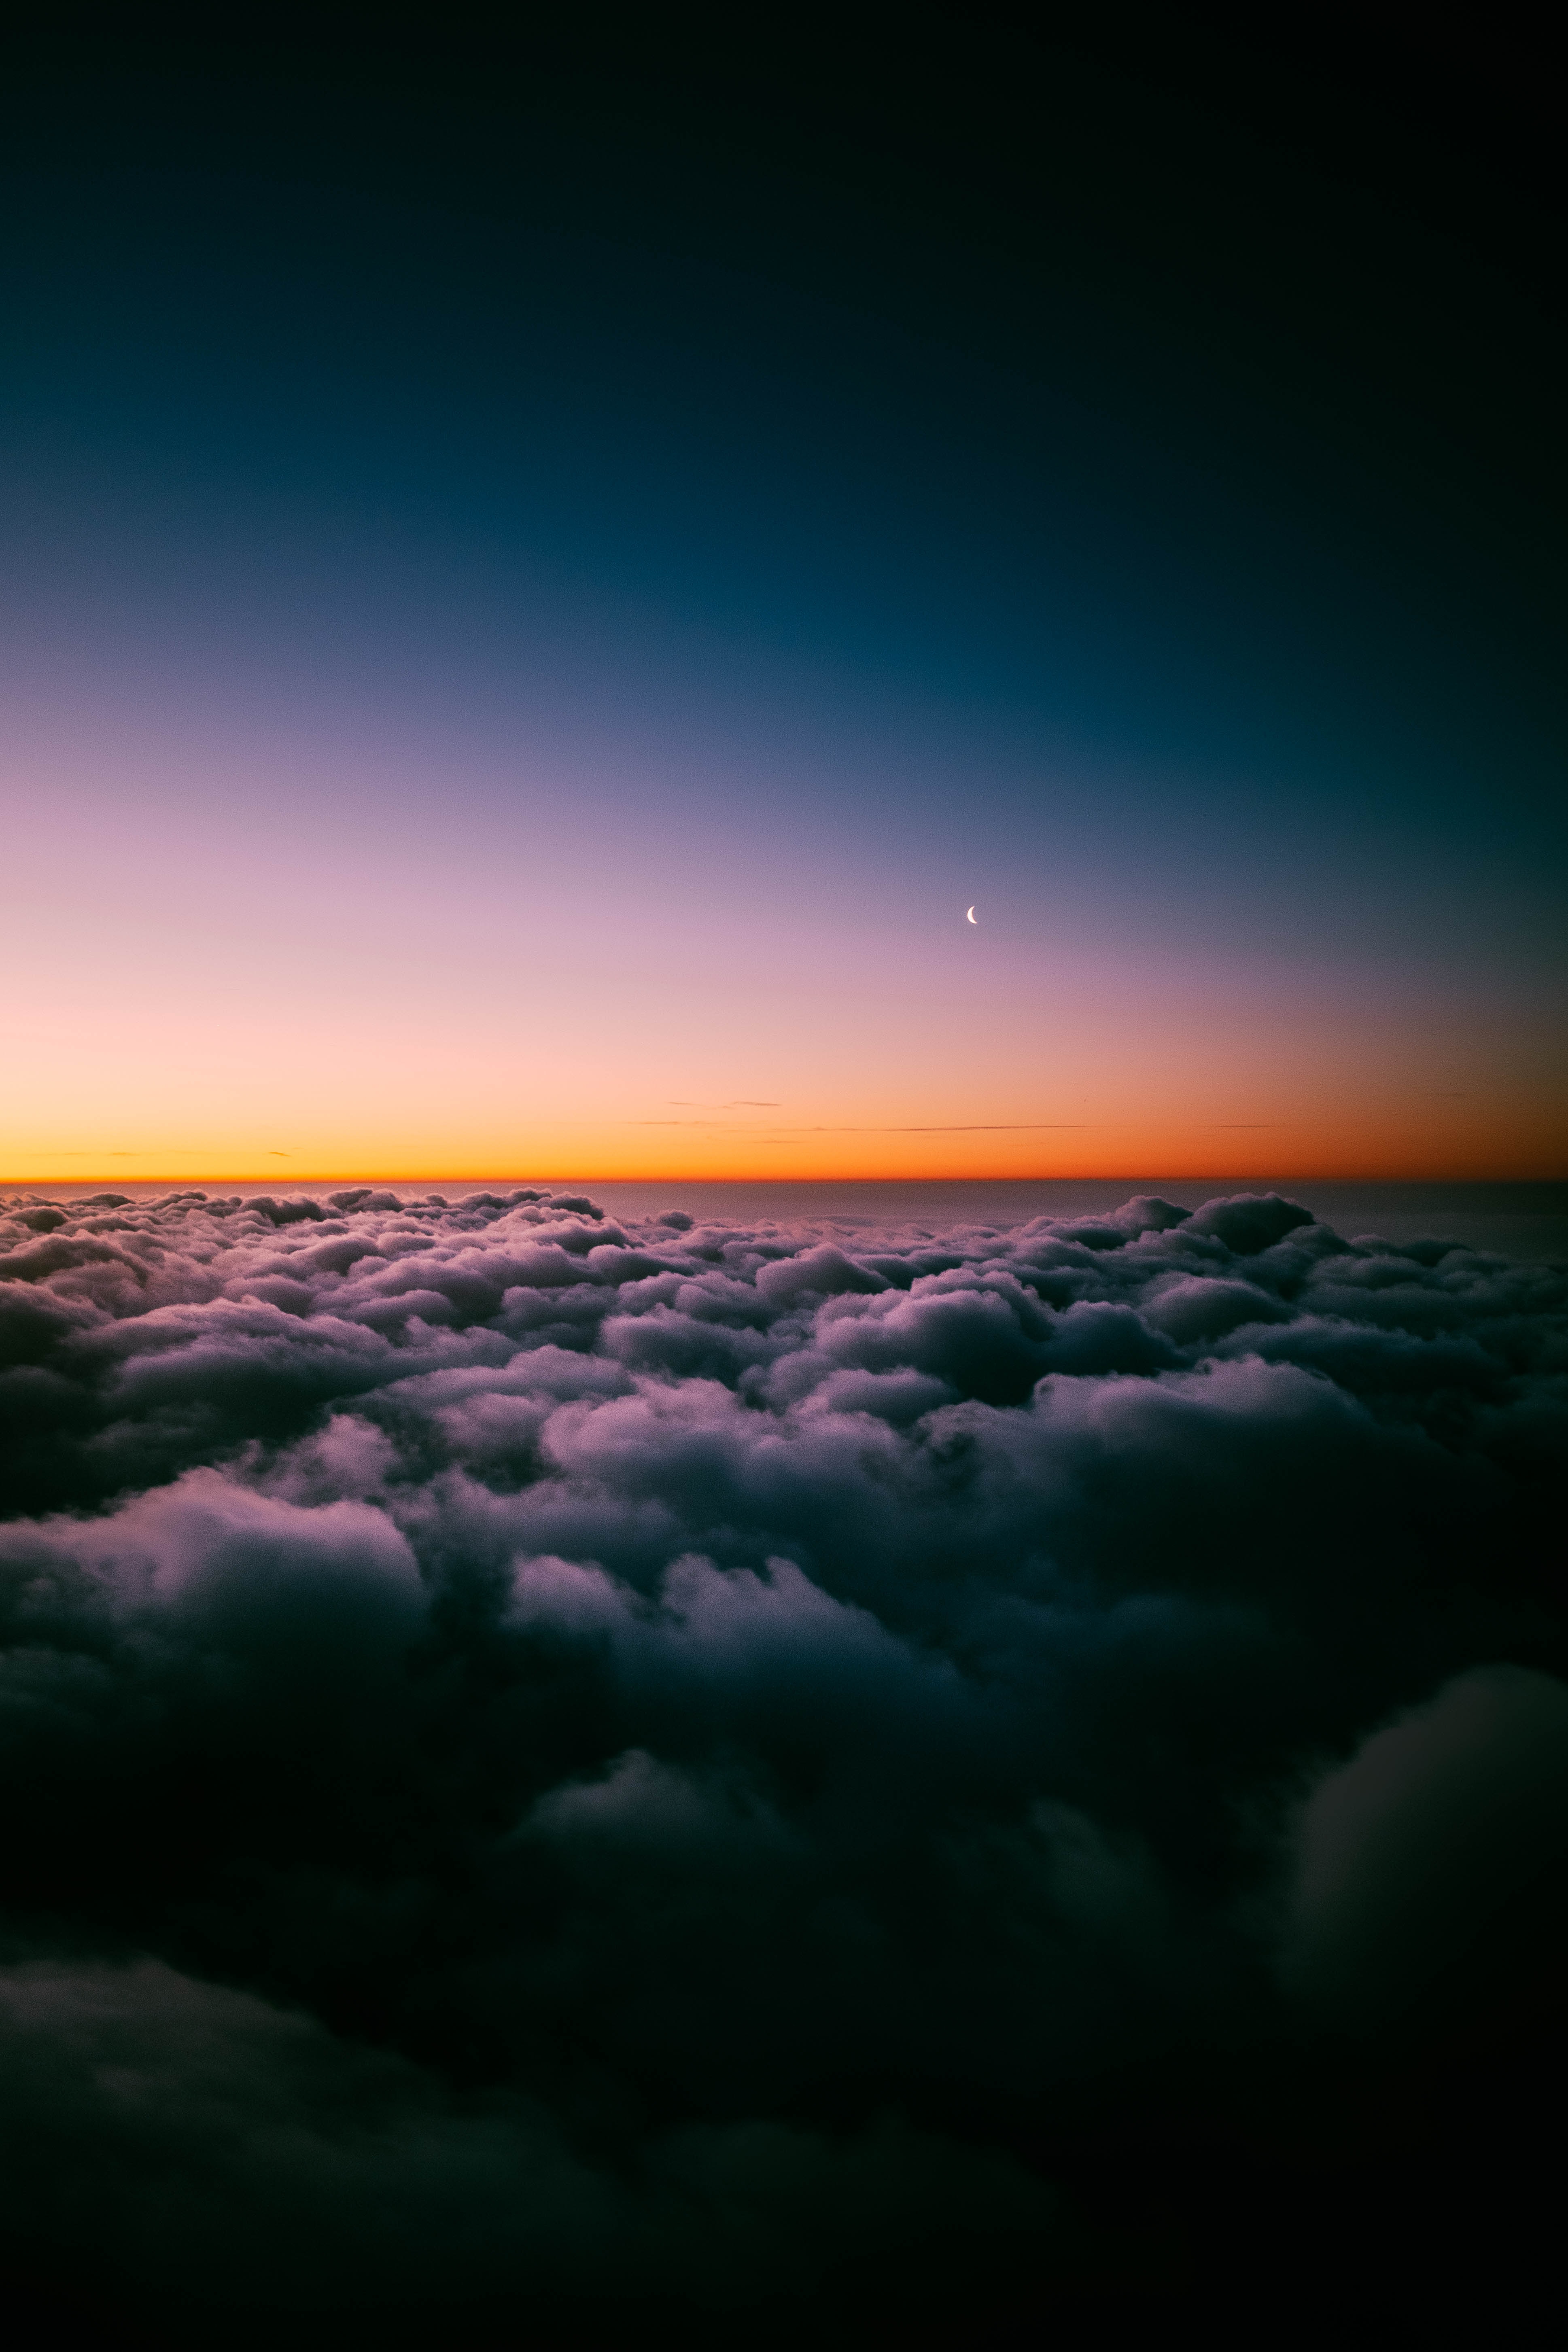 clouds, above the clouds, porous, moon, nature, sunset, twilight, dusk, sky horizon phone background